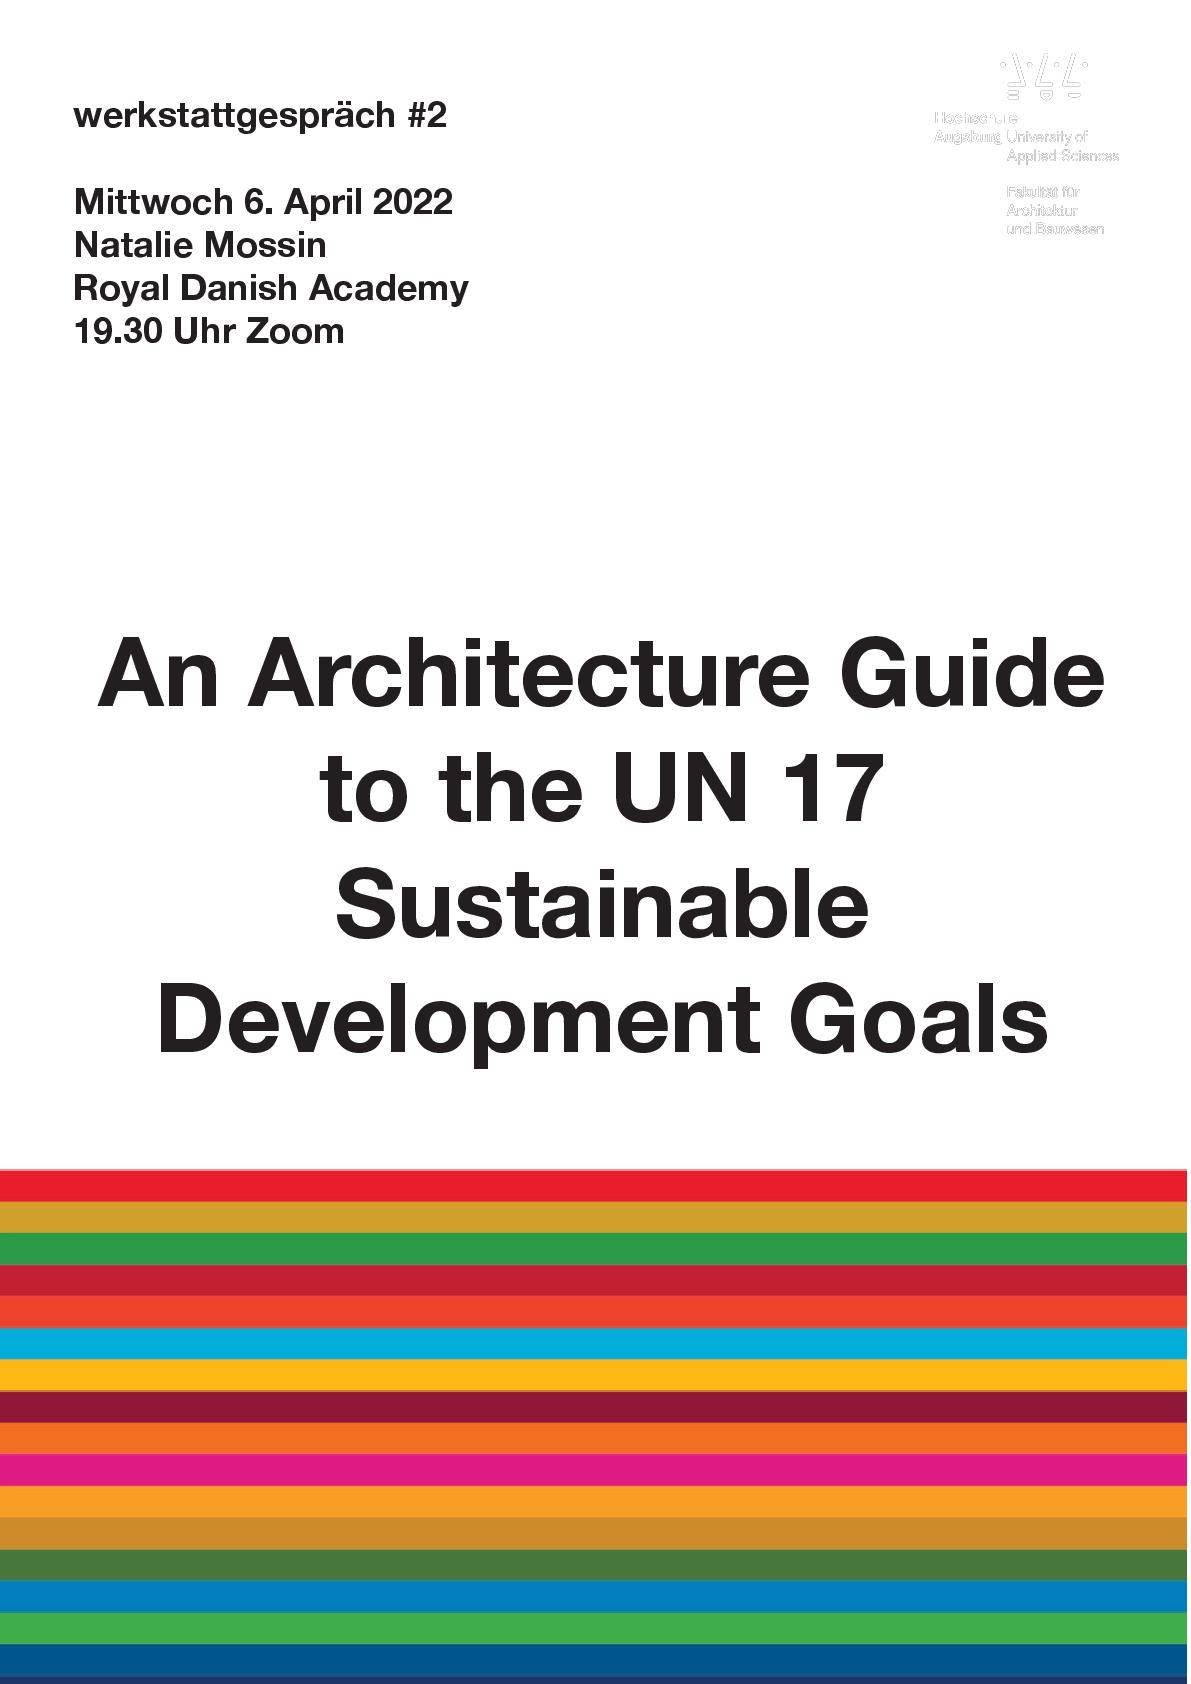 An achitecture guide to the UN 17 sustainable development goals